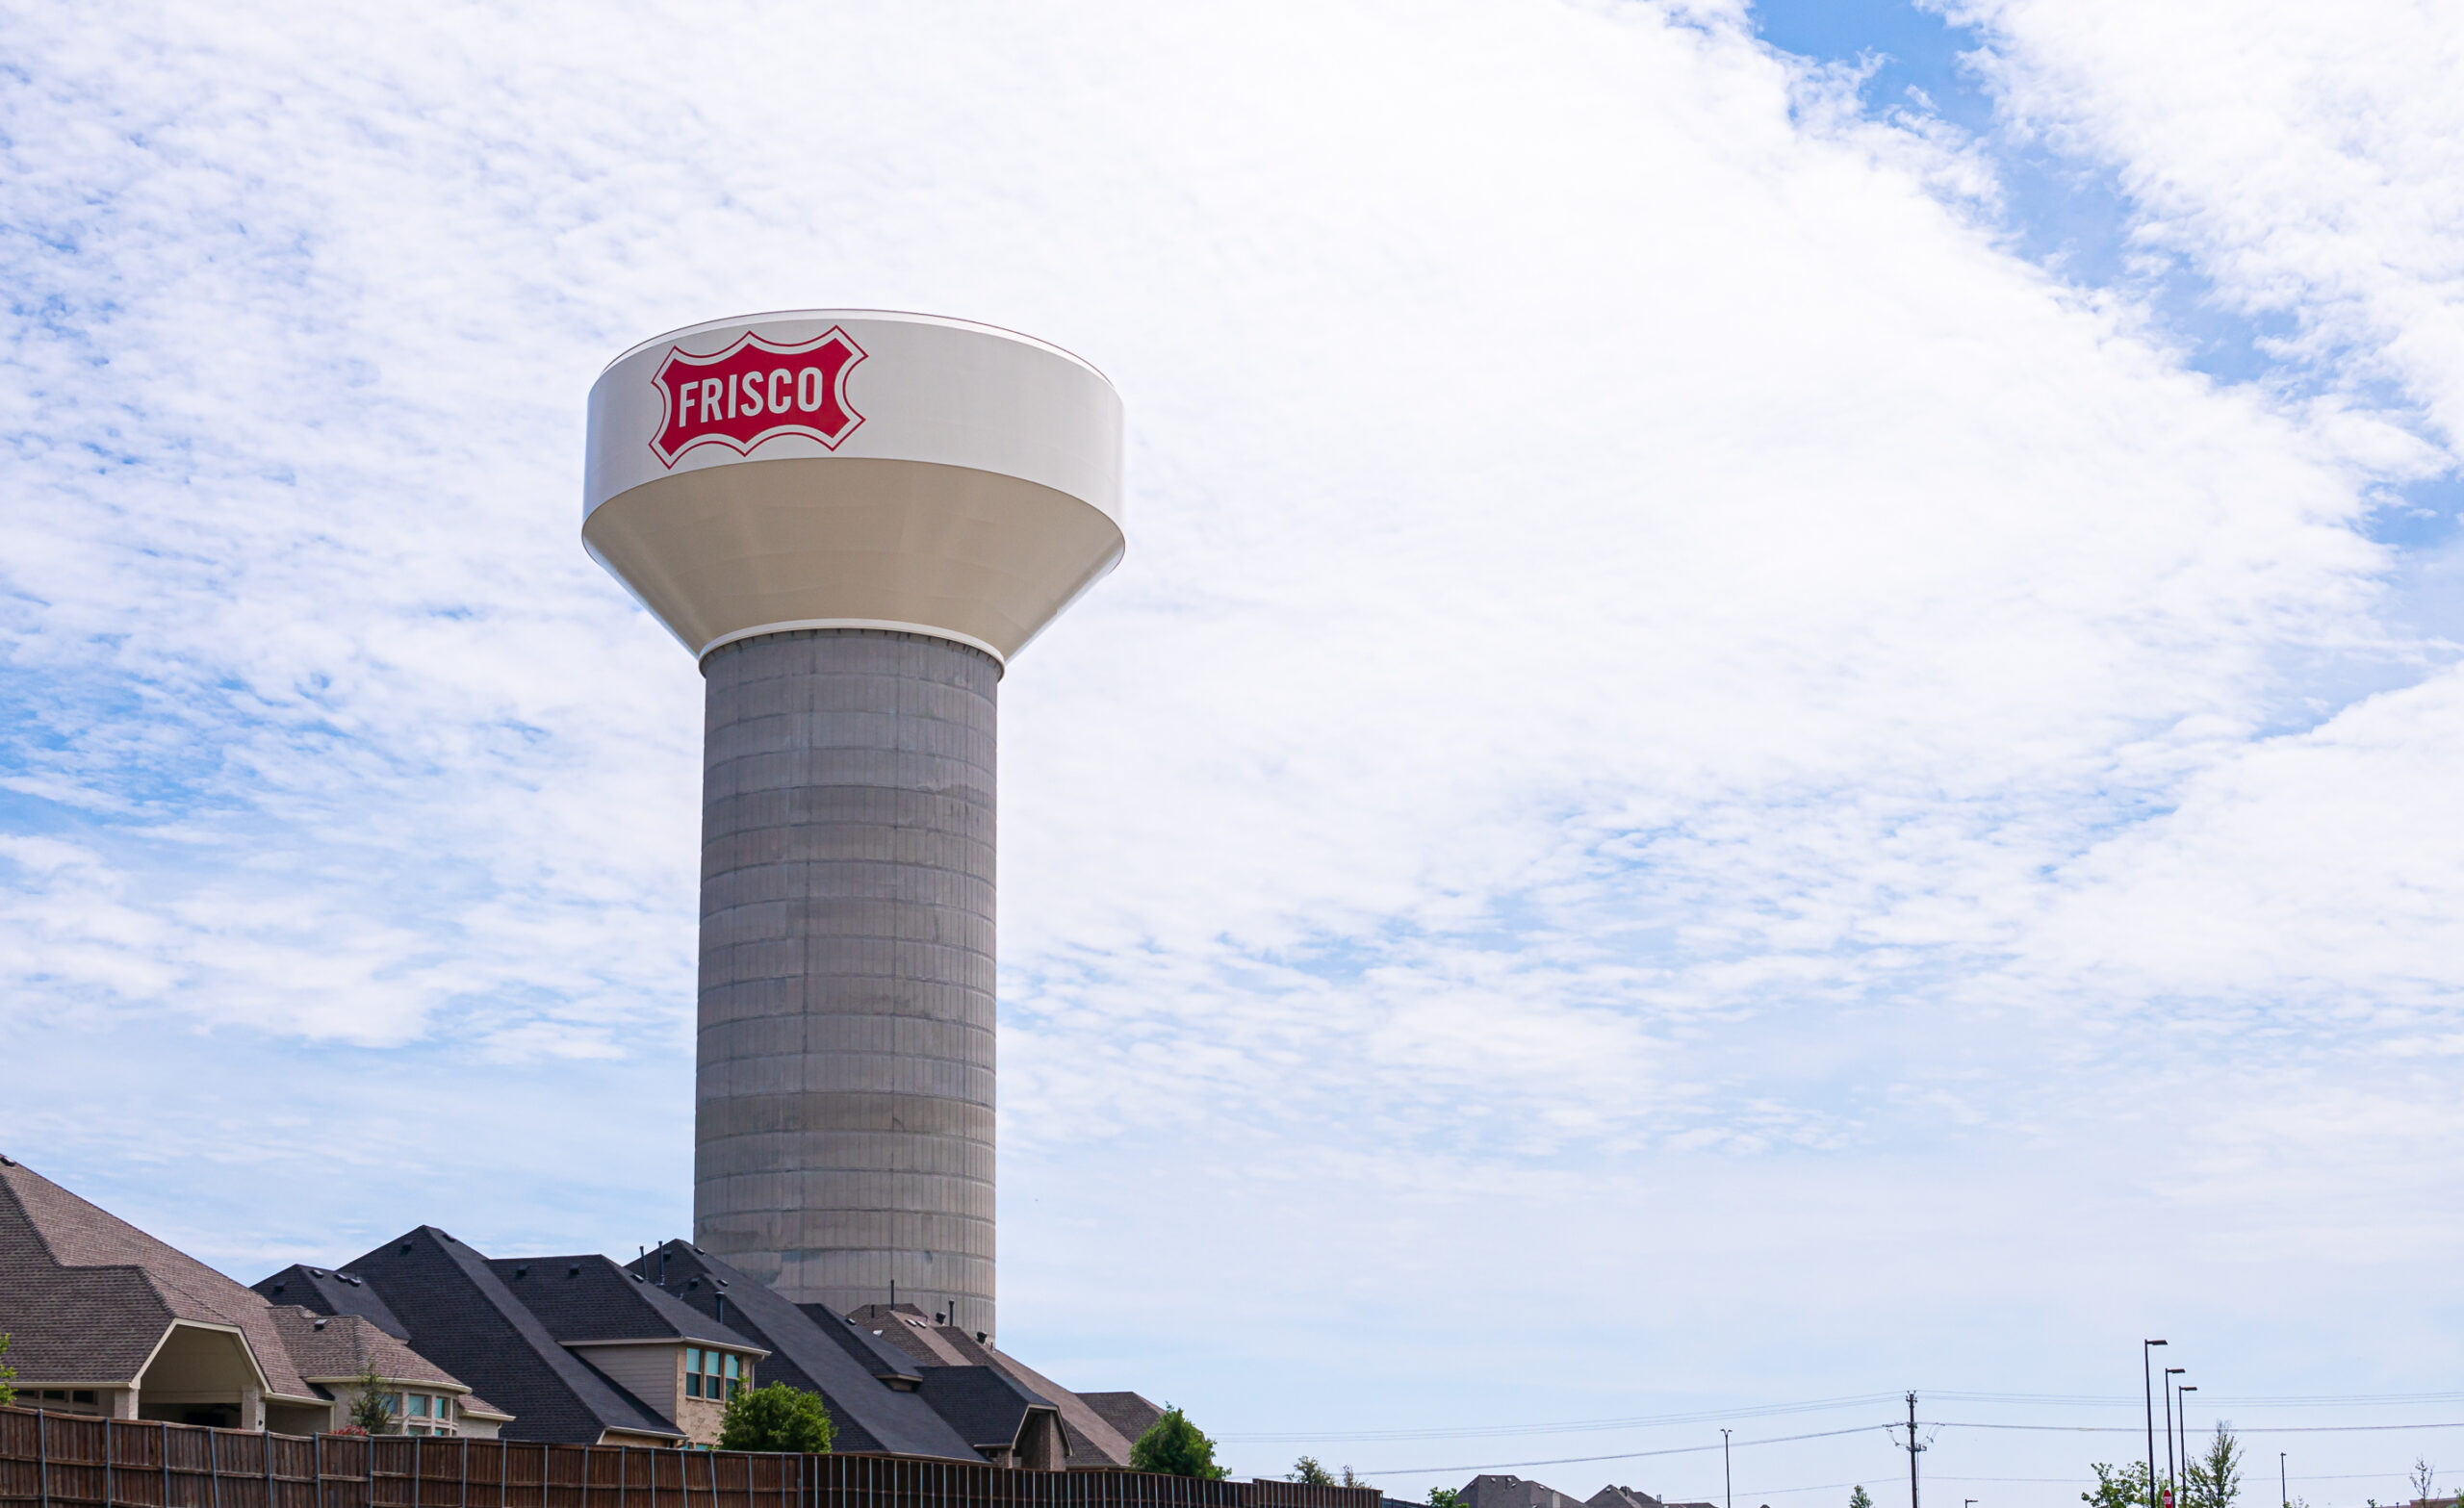 A large water tower with the word "frisco" on it, standing tall against a blue sky, surrounded by suburban homes.